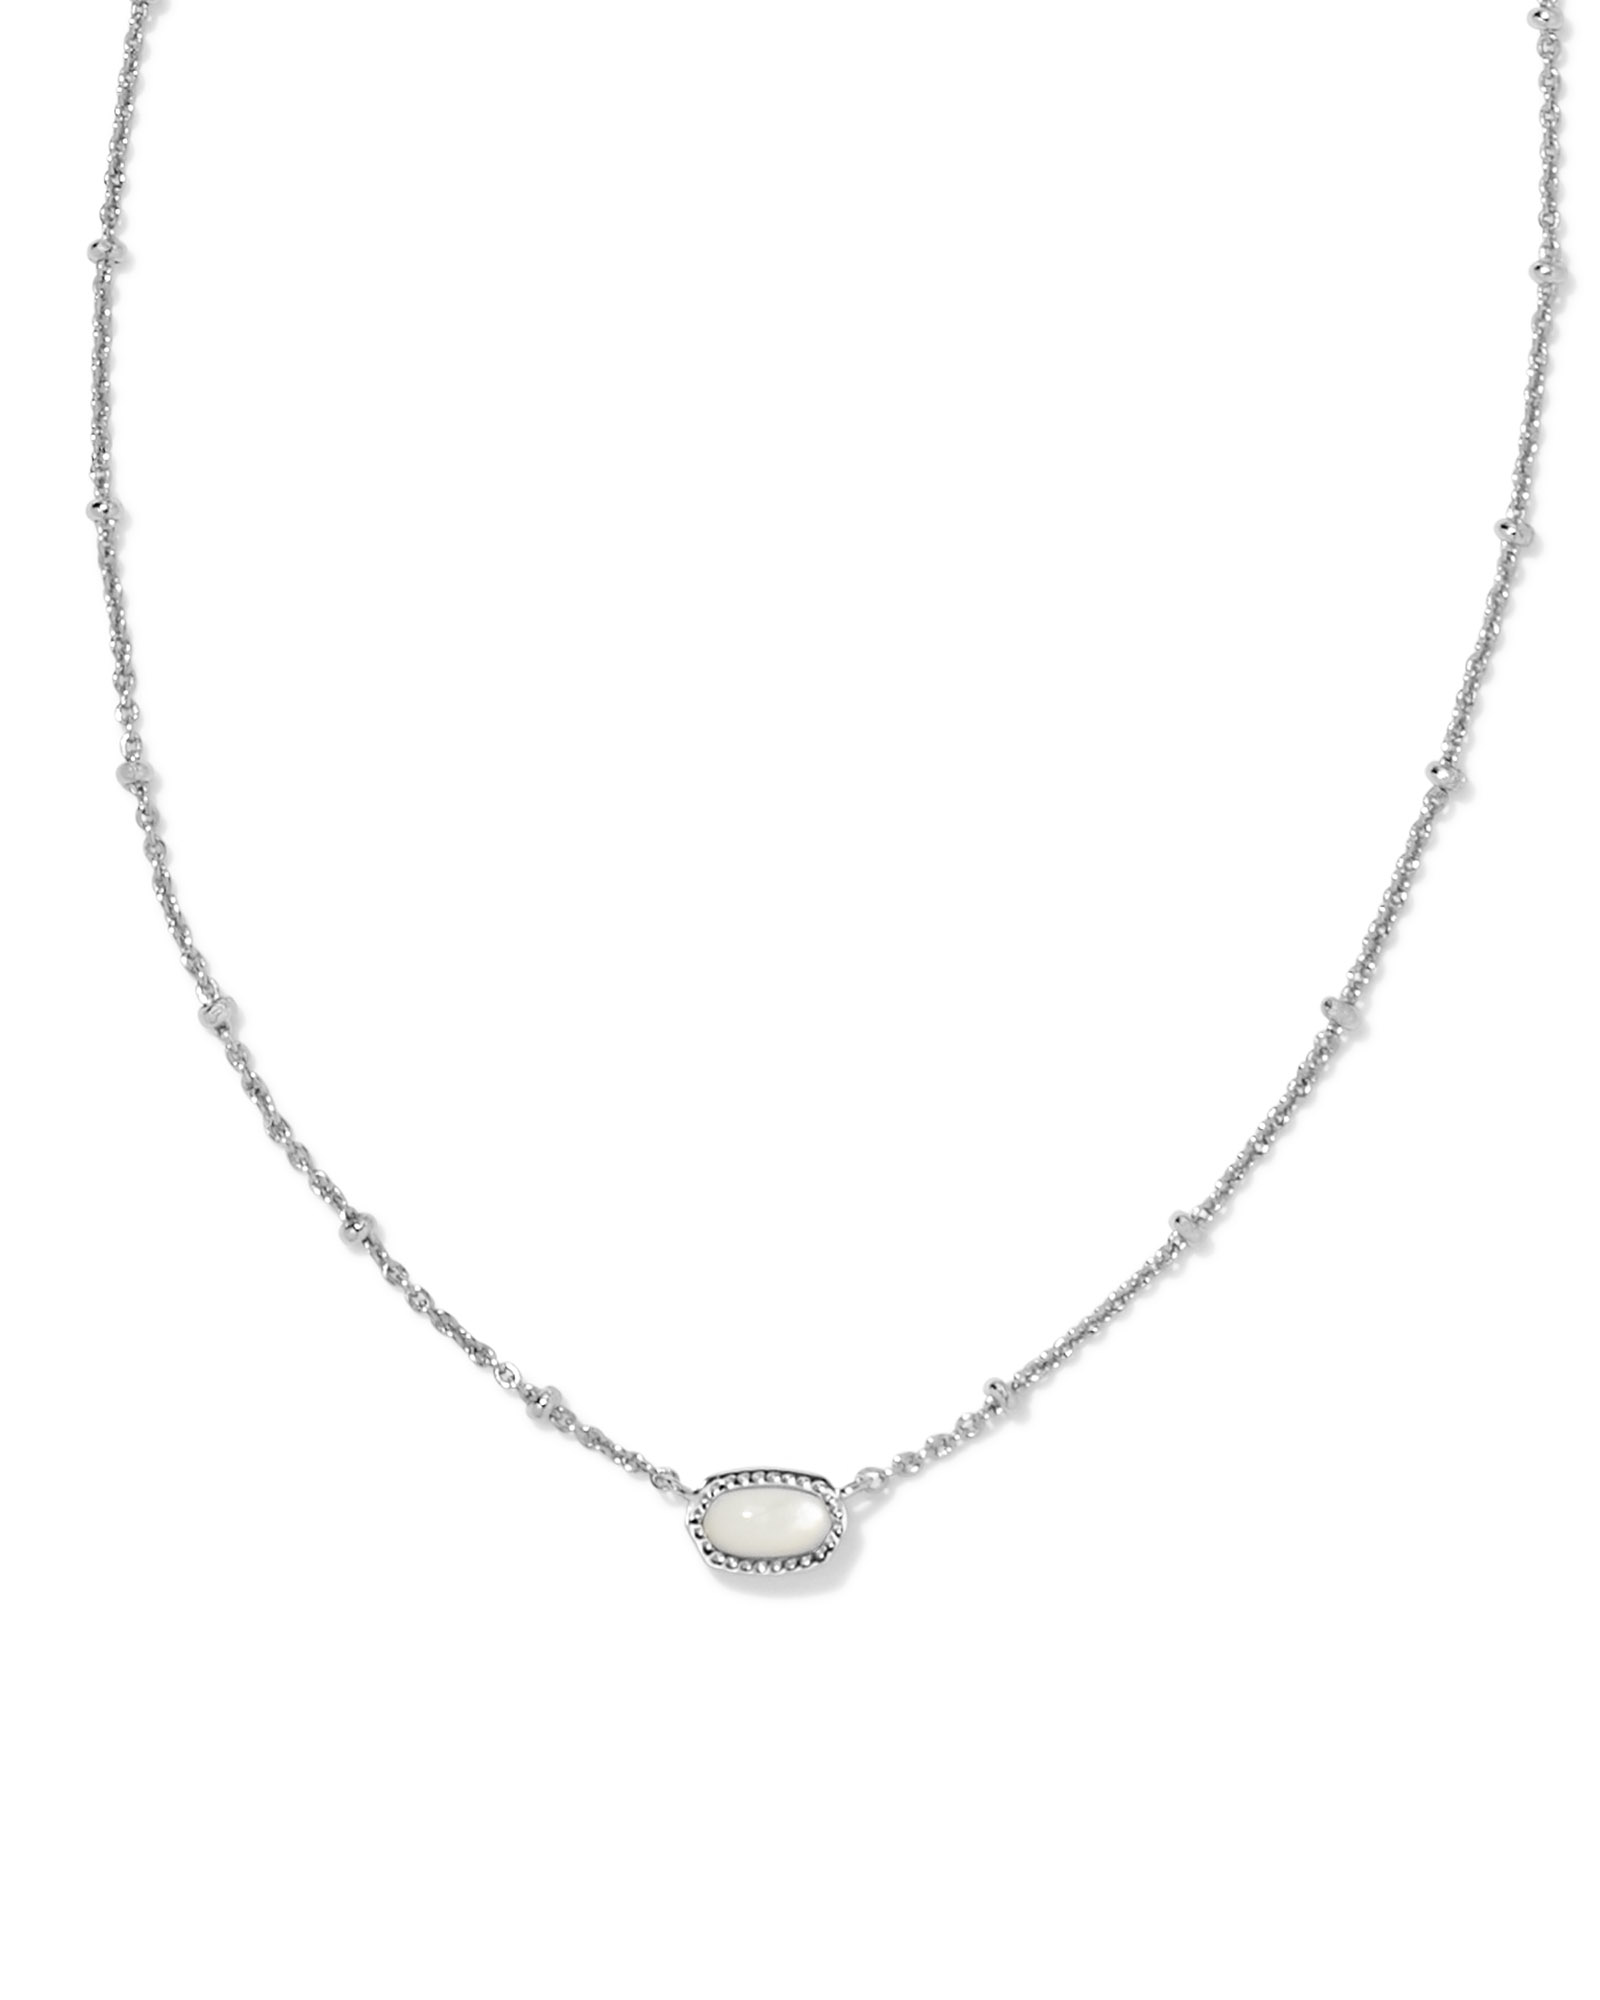 Mini Elisa Silver Satellite Short Pendant Necklace in Ivory Mother-of-Pearl| Kendra Scott